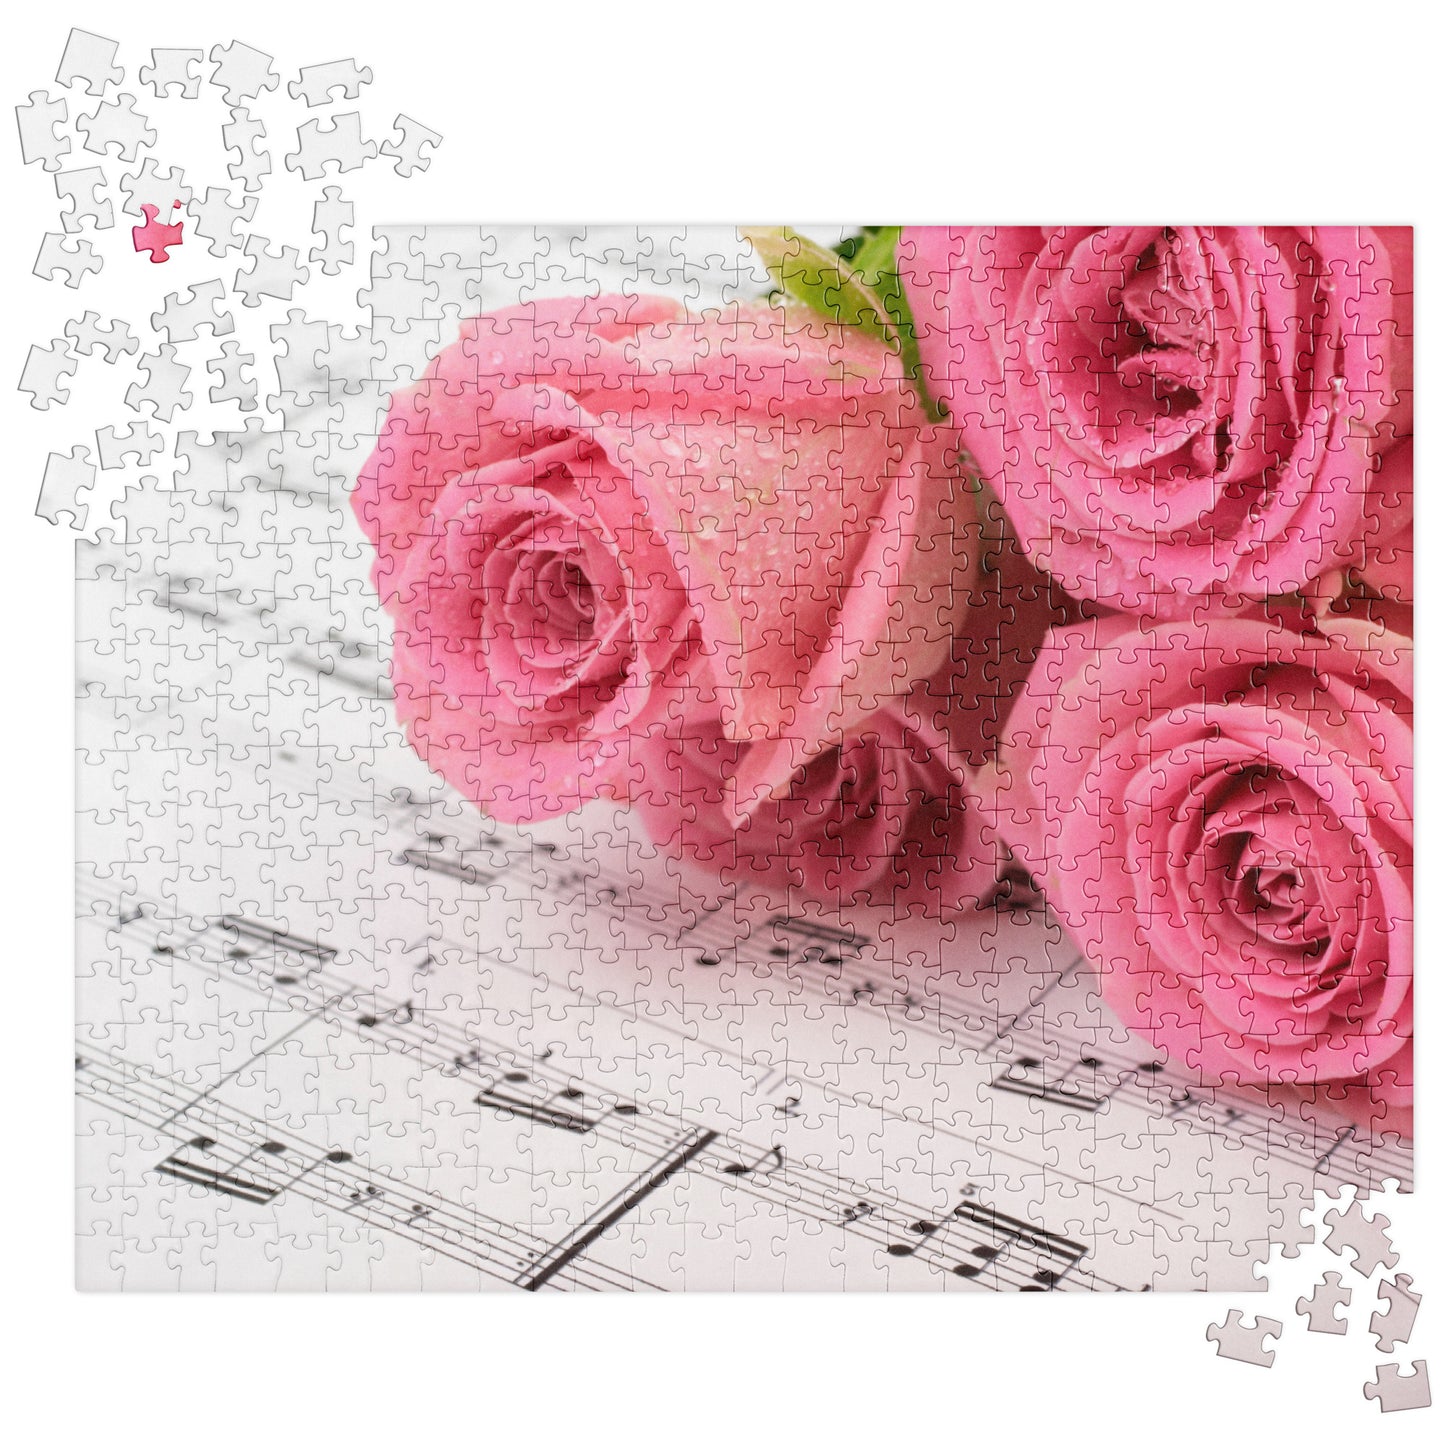 Floral Jigsaw Puzzle: Wet Roses & Sheet Music